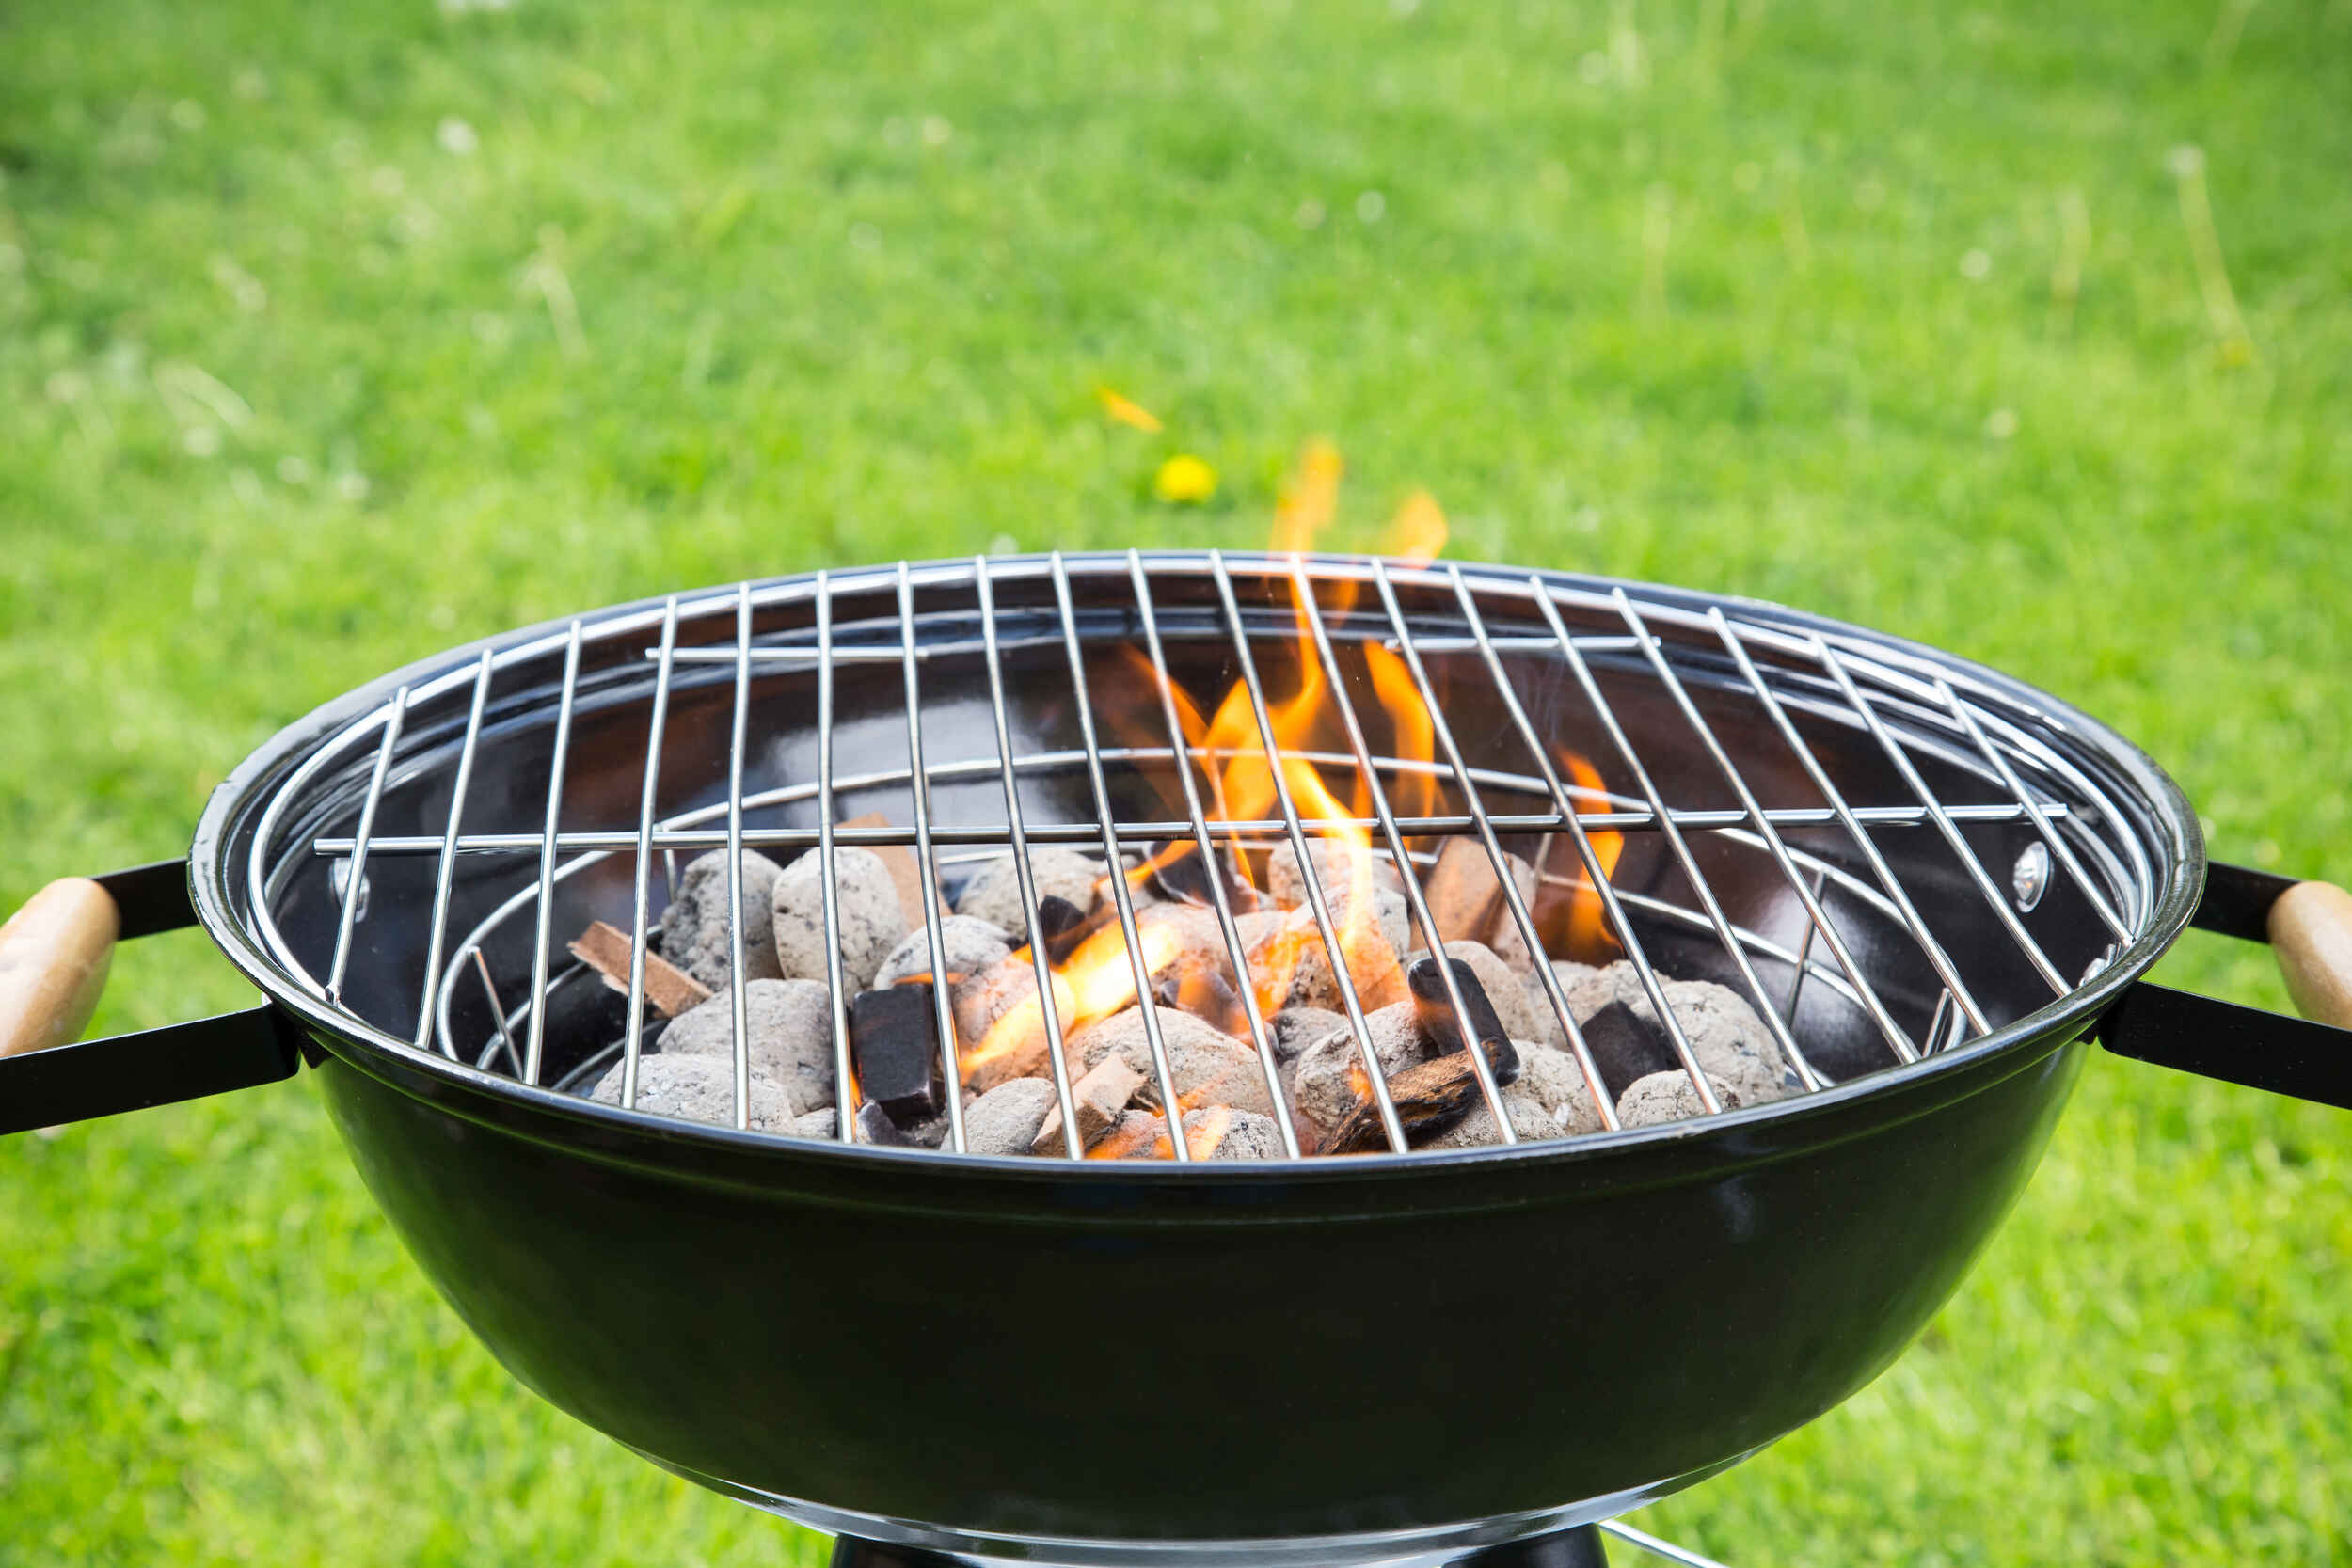 How To Set Up Charcoal Grill Without Chimney